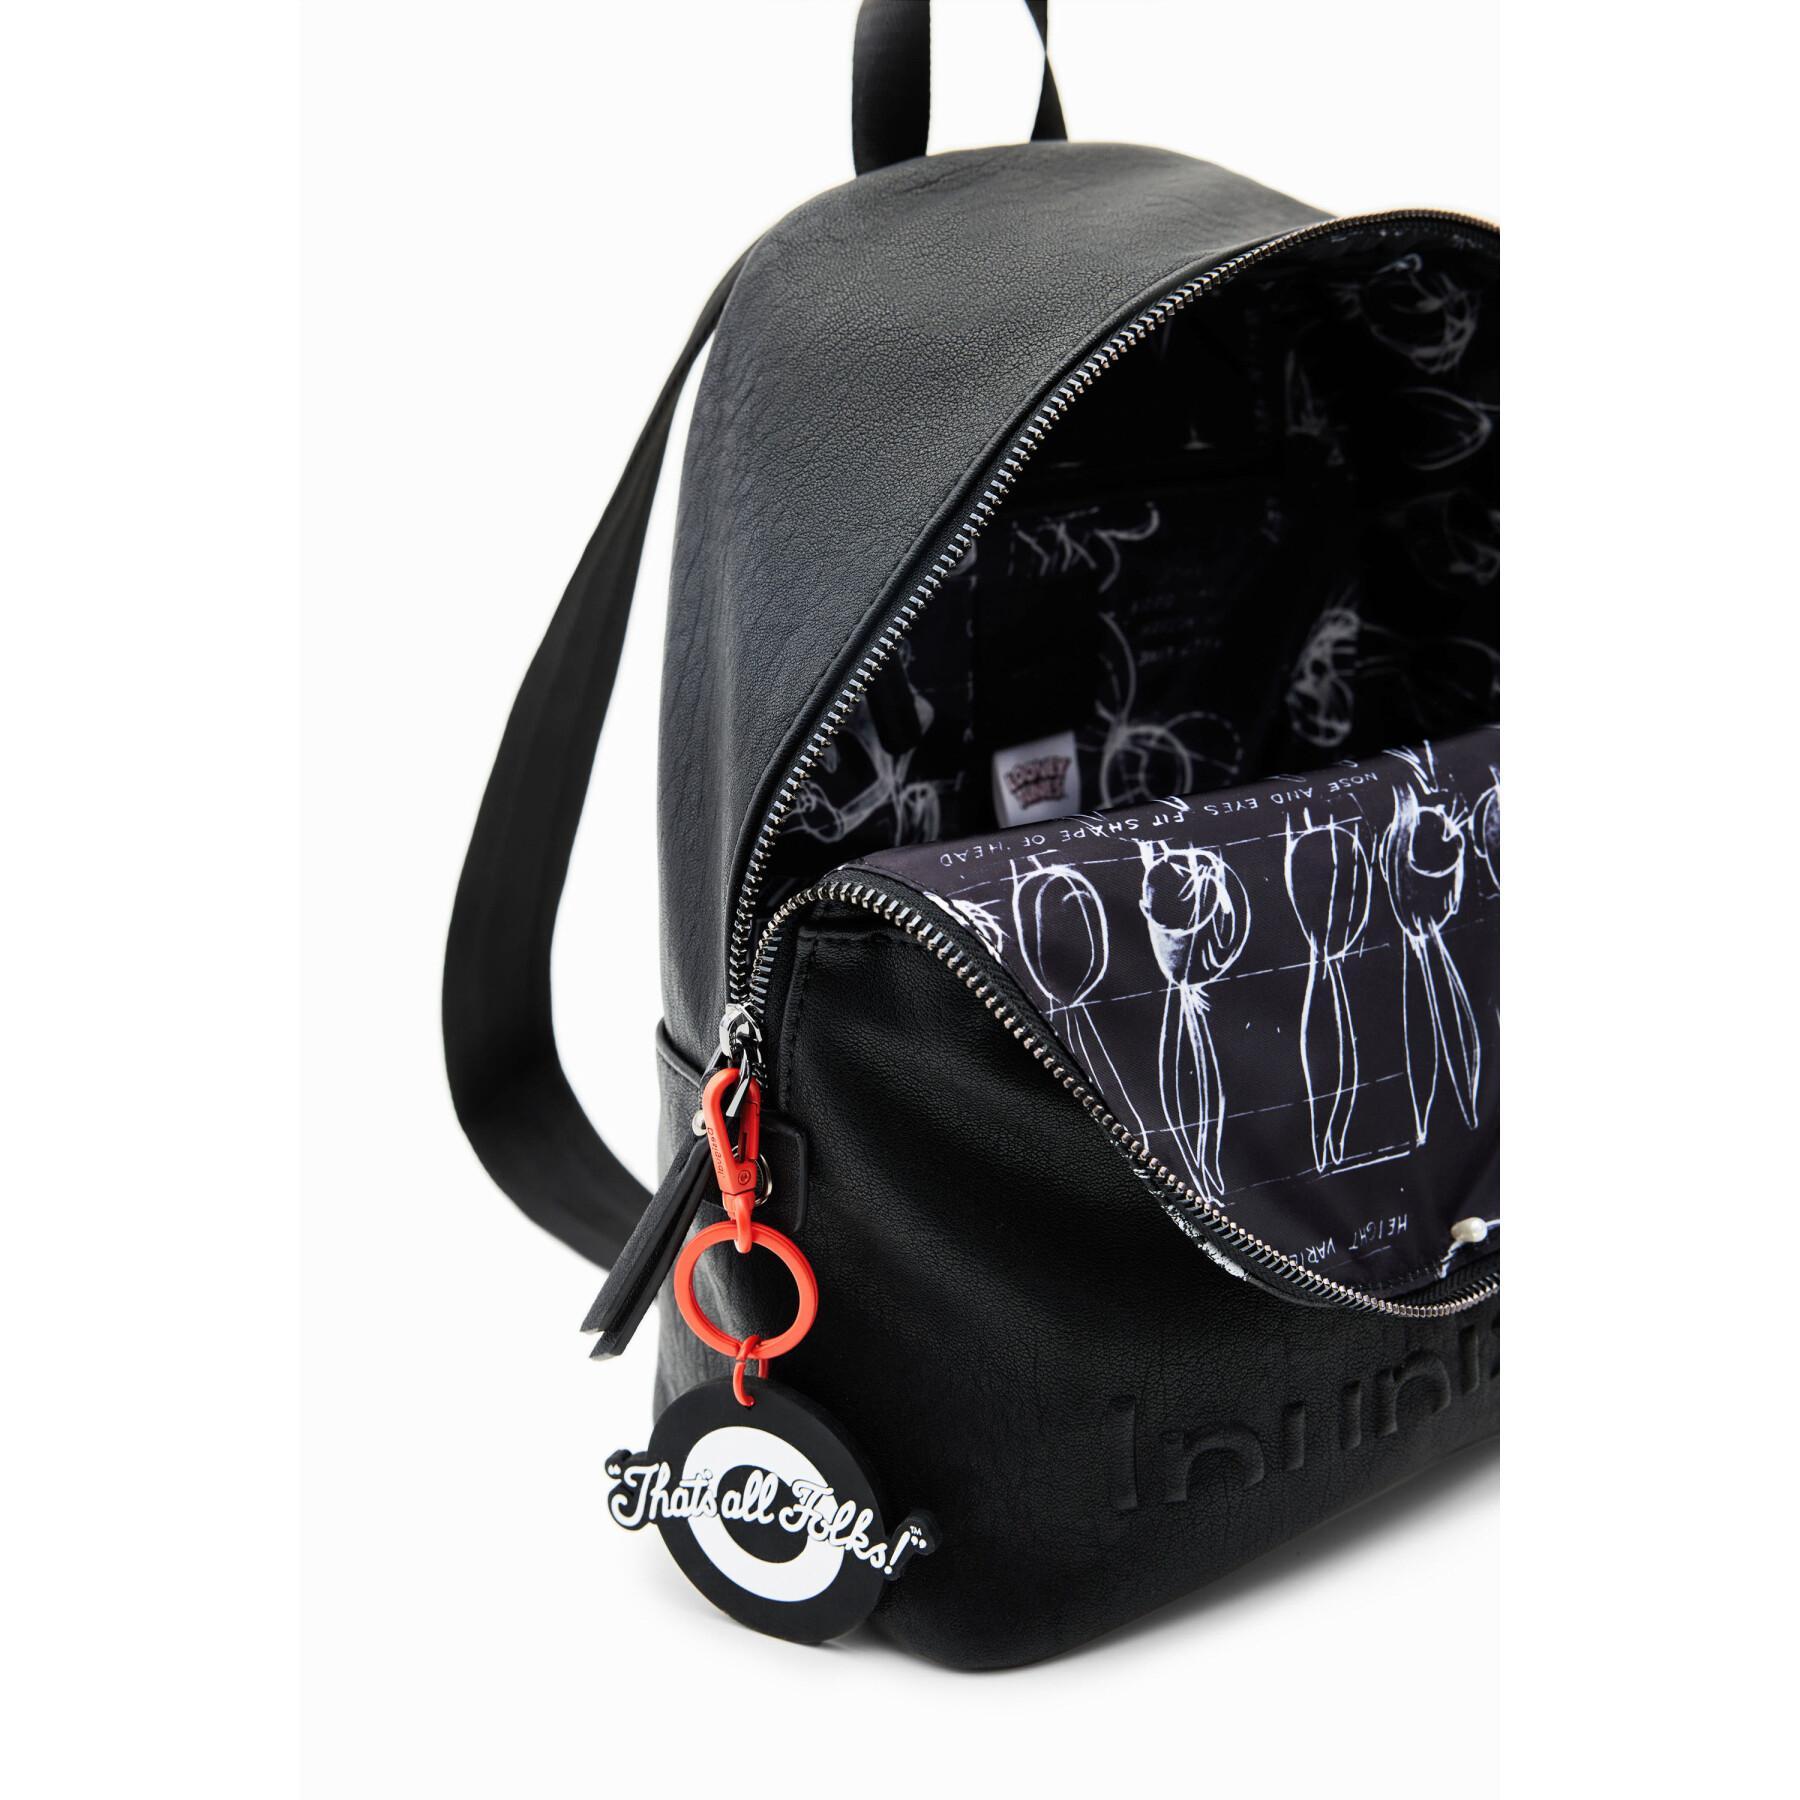 Small backpack for women Desigual Bugs Bunny